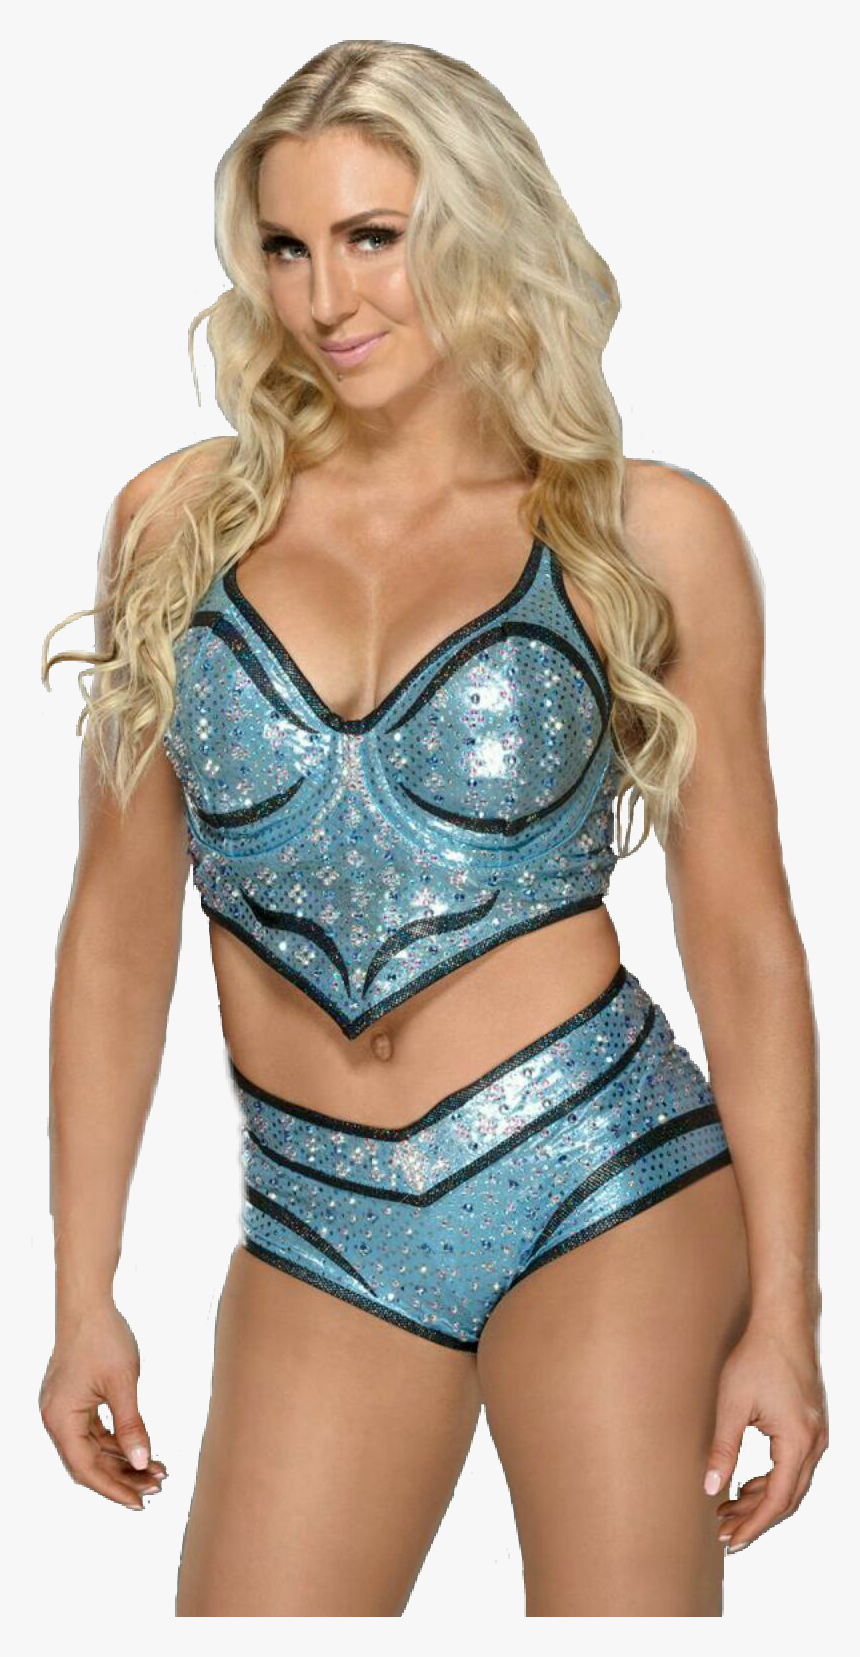 #charlotte #charlottewwe #wwecharlotte #charlotteflair - Charlotte Flair Wwe Superstar, HD Png Download, Free Download